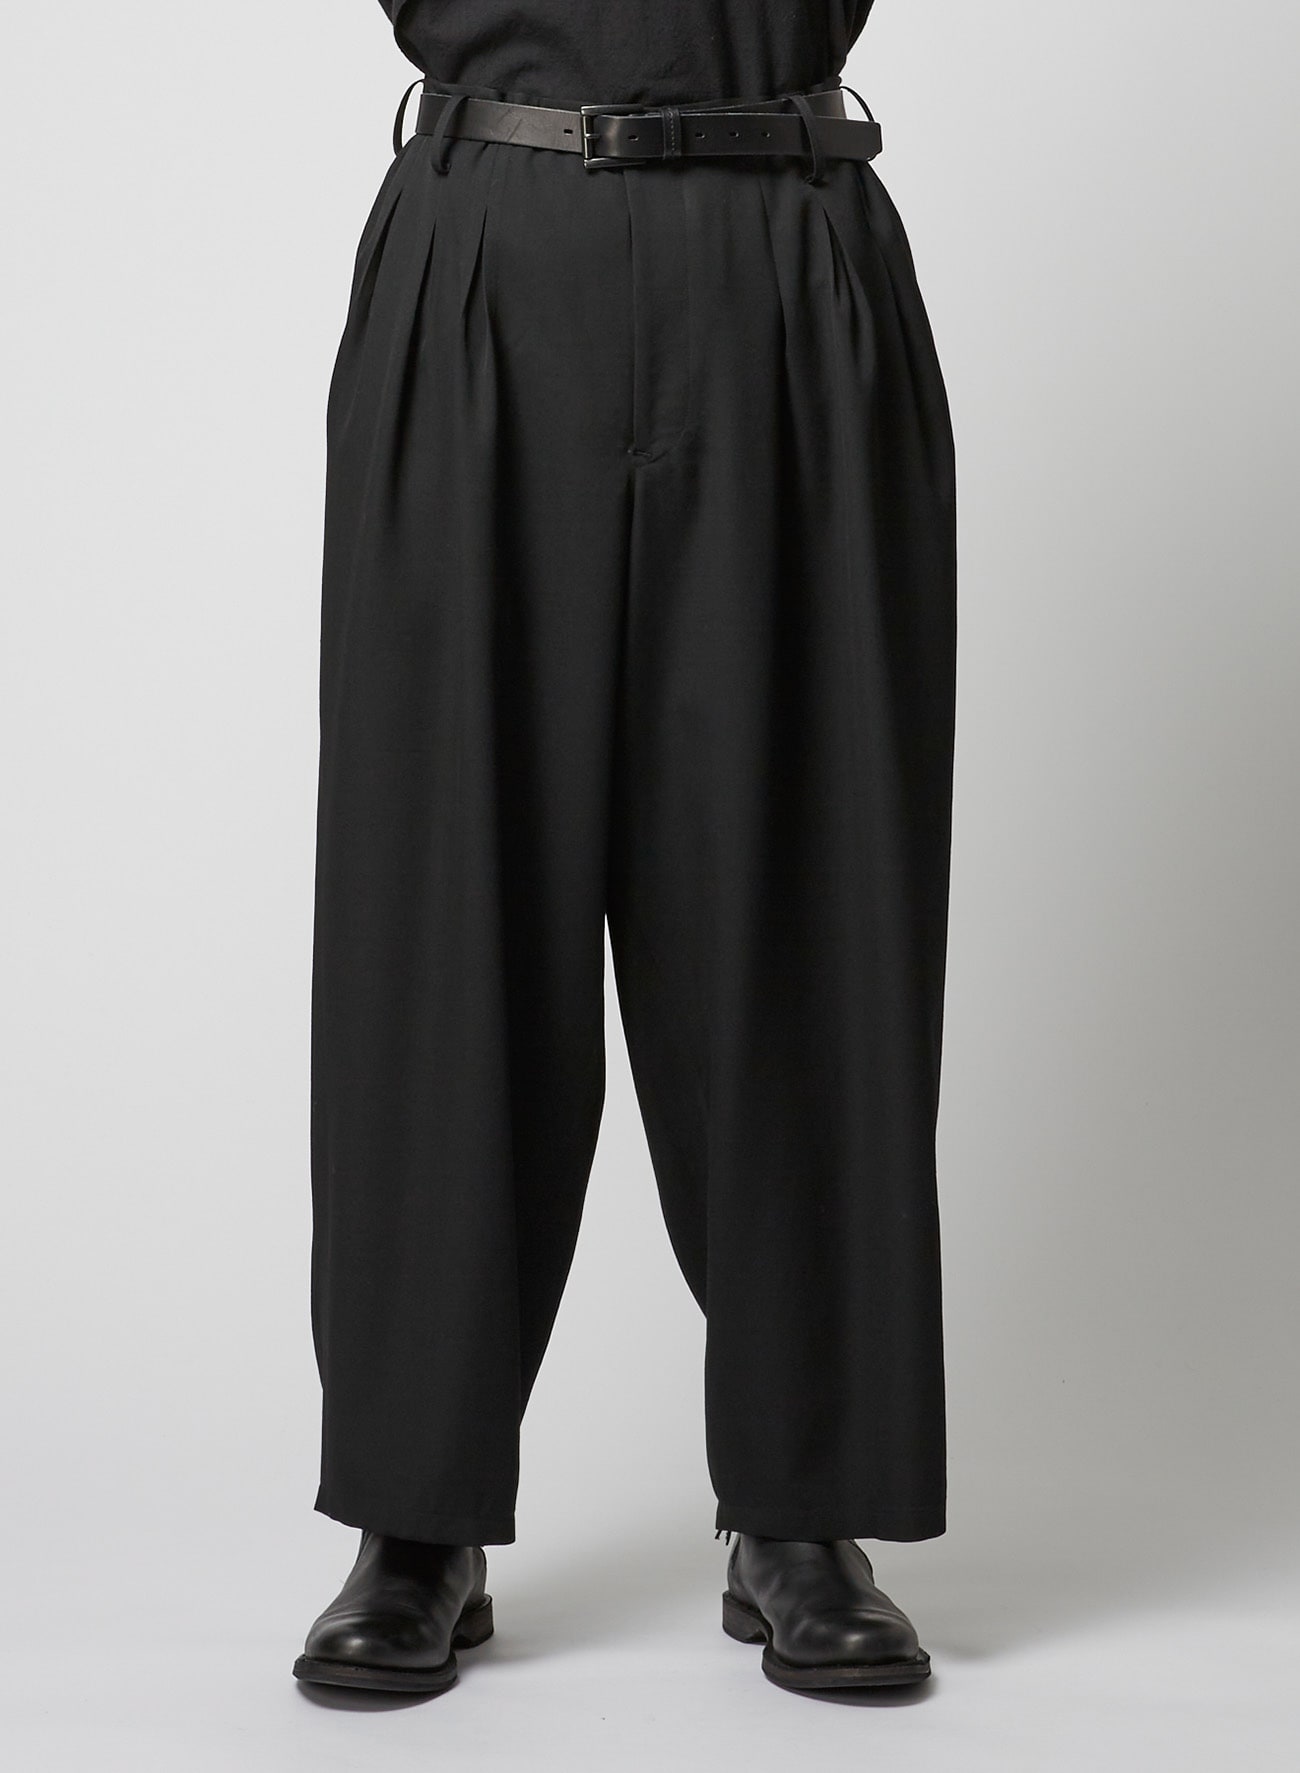 Topman double pleated tapered trousers in black | ASOS